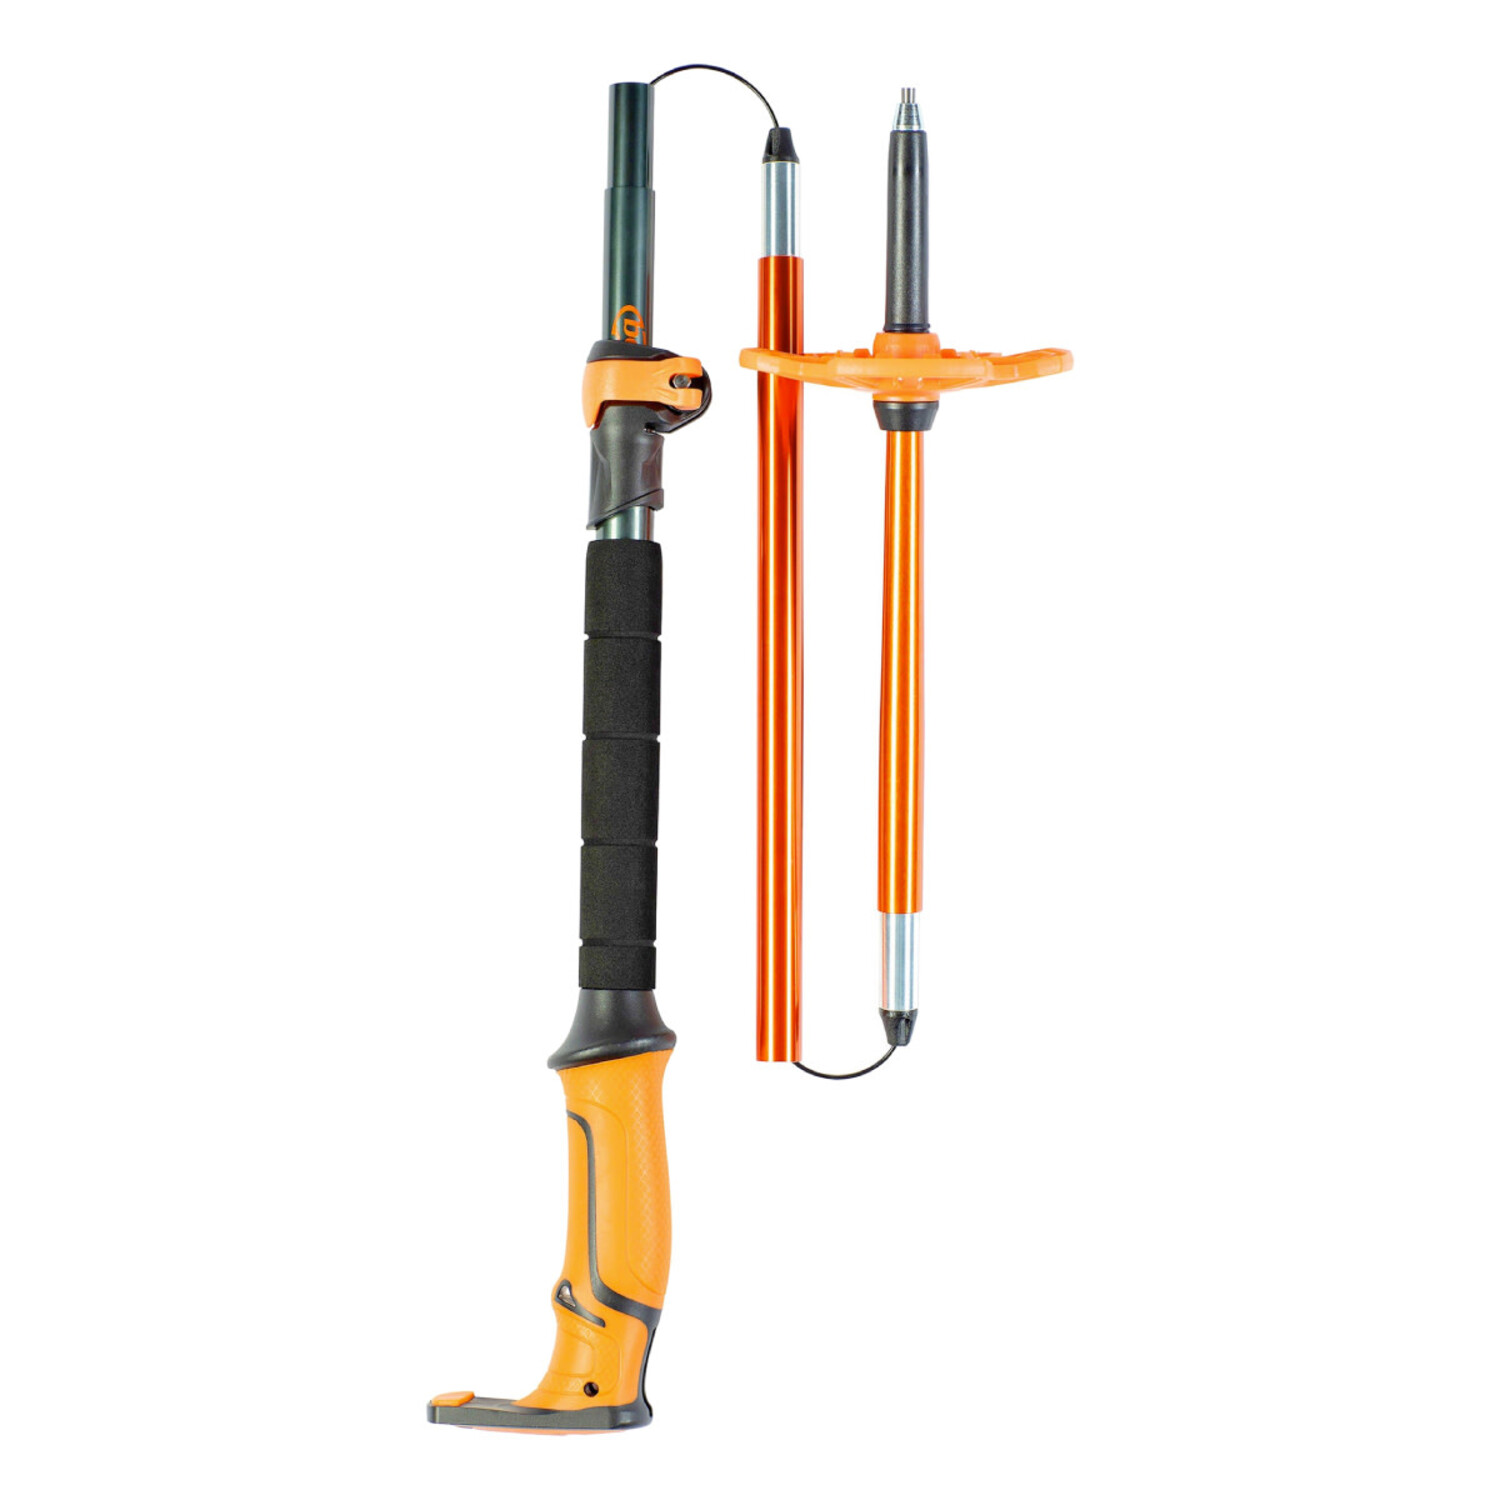 Backcountry Access Scepter Adjustable Pole 4S - True Outdoors